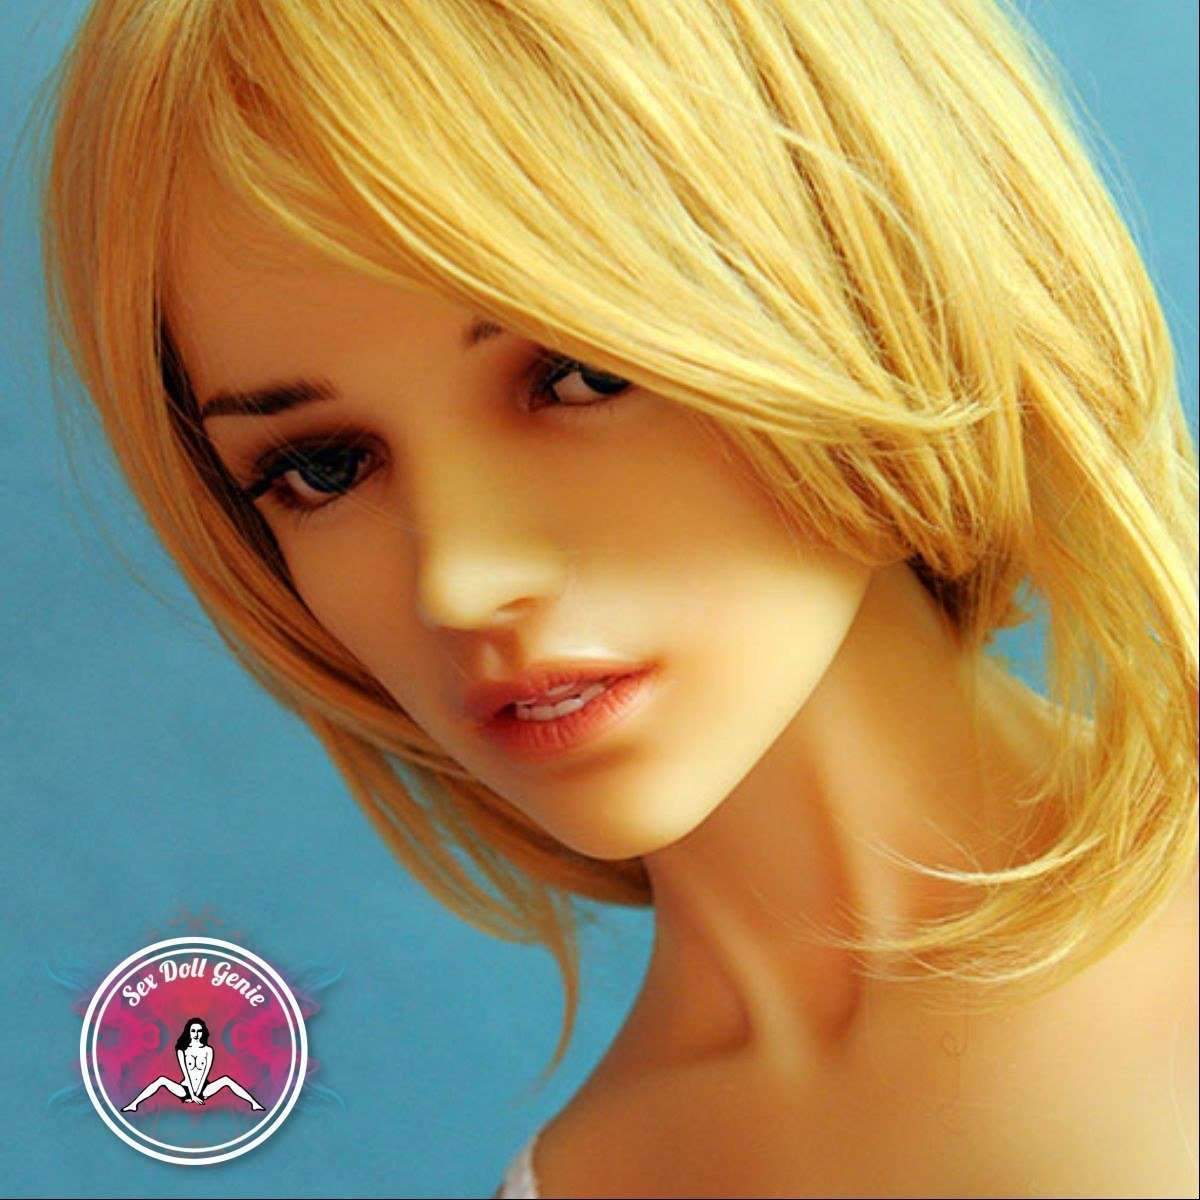 DS Doll - 158cm - Mandy Head - Type 1 D Cup Silicone Doll-6